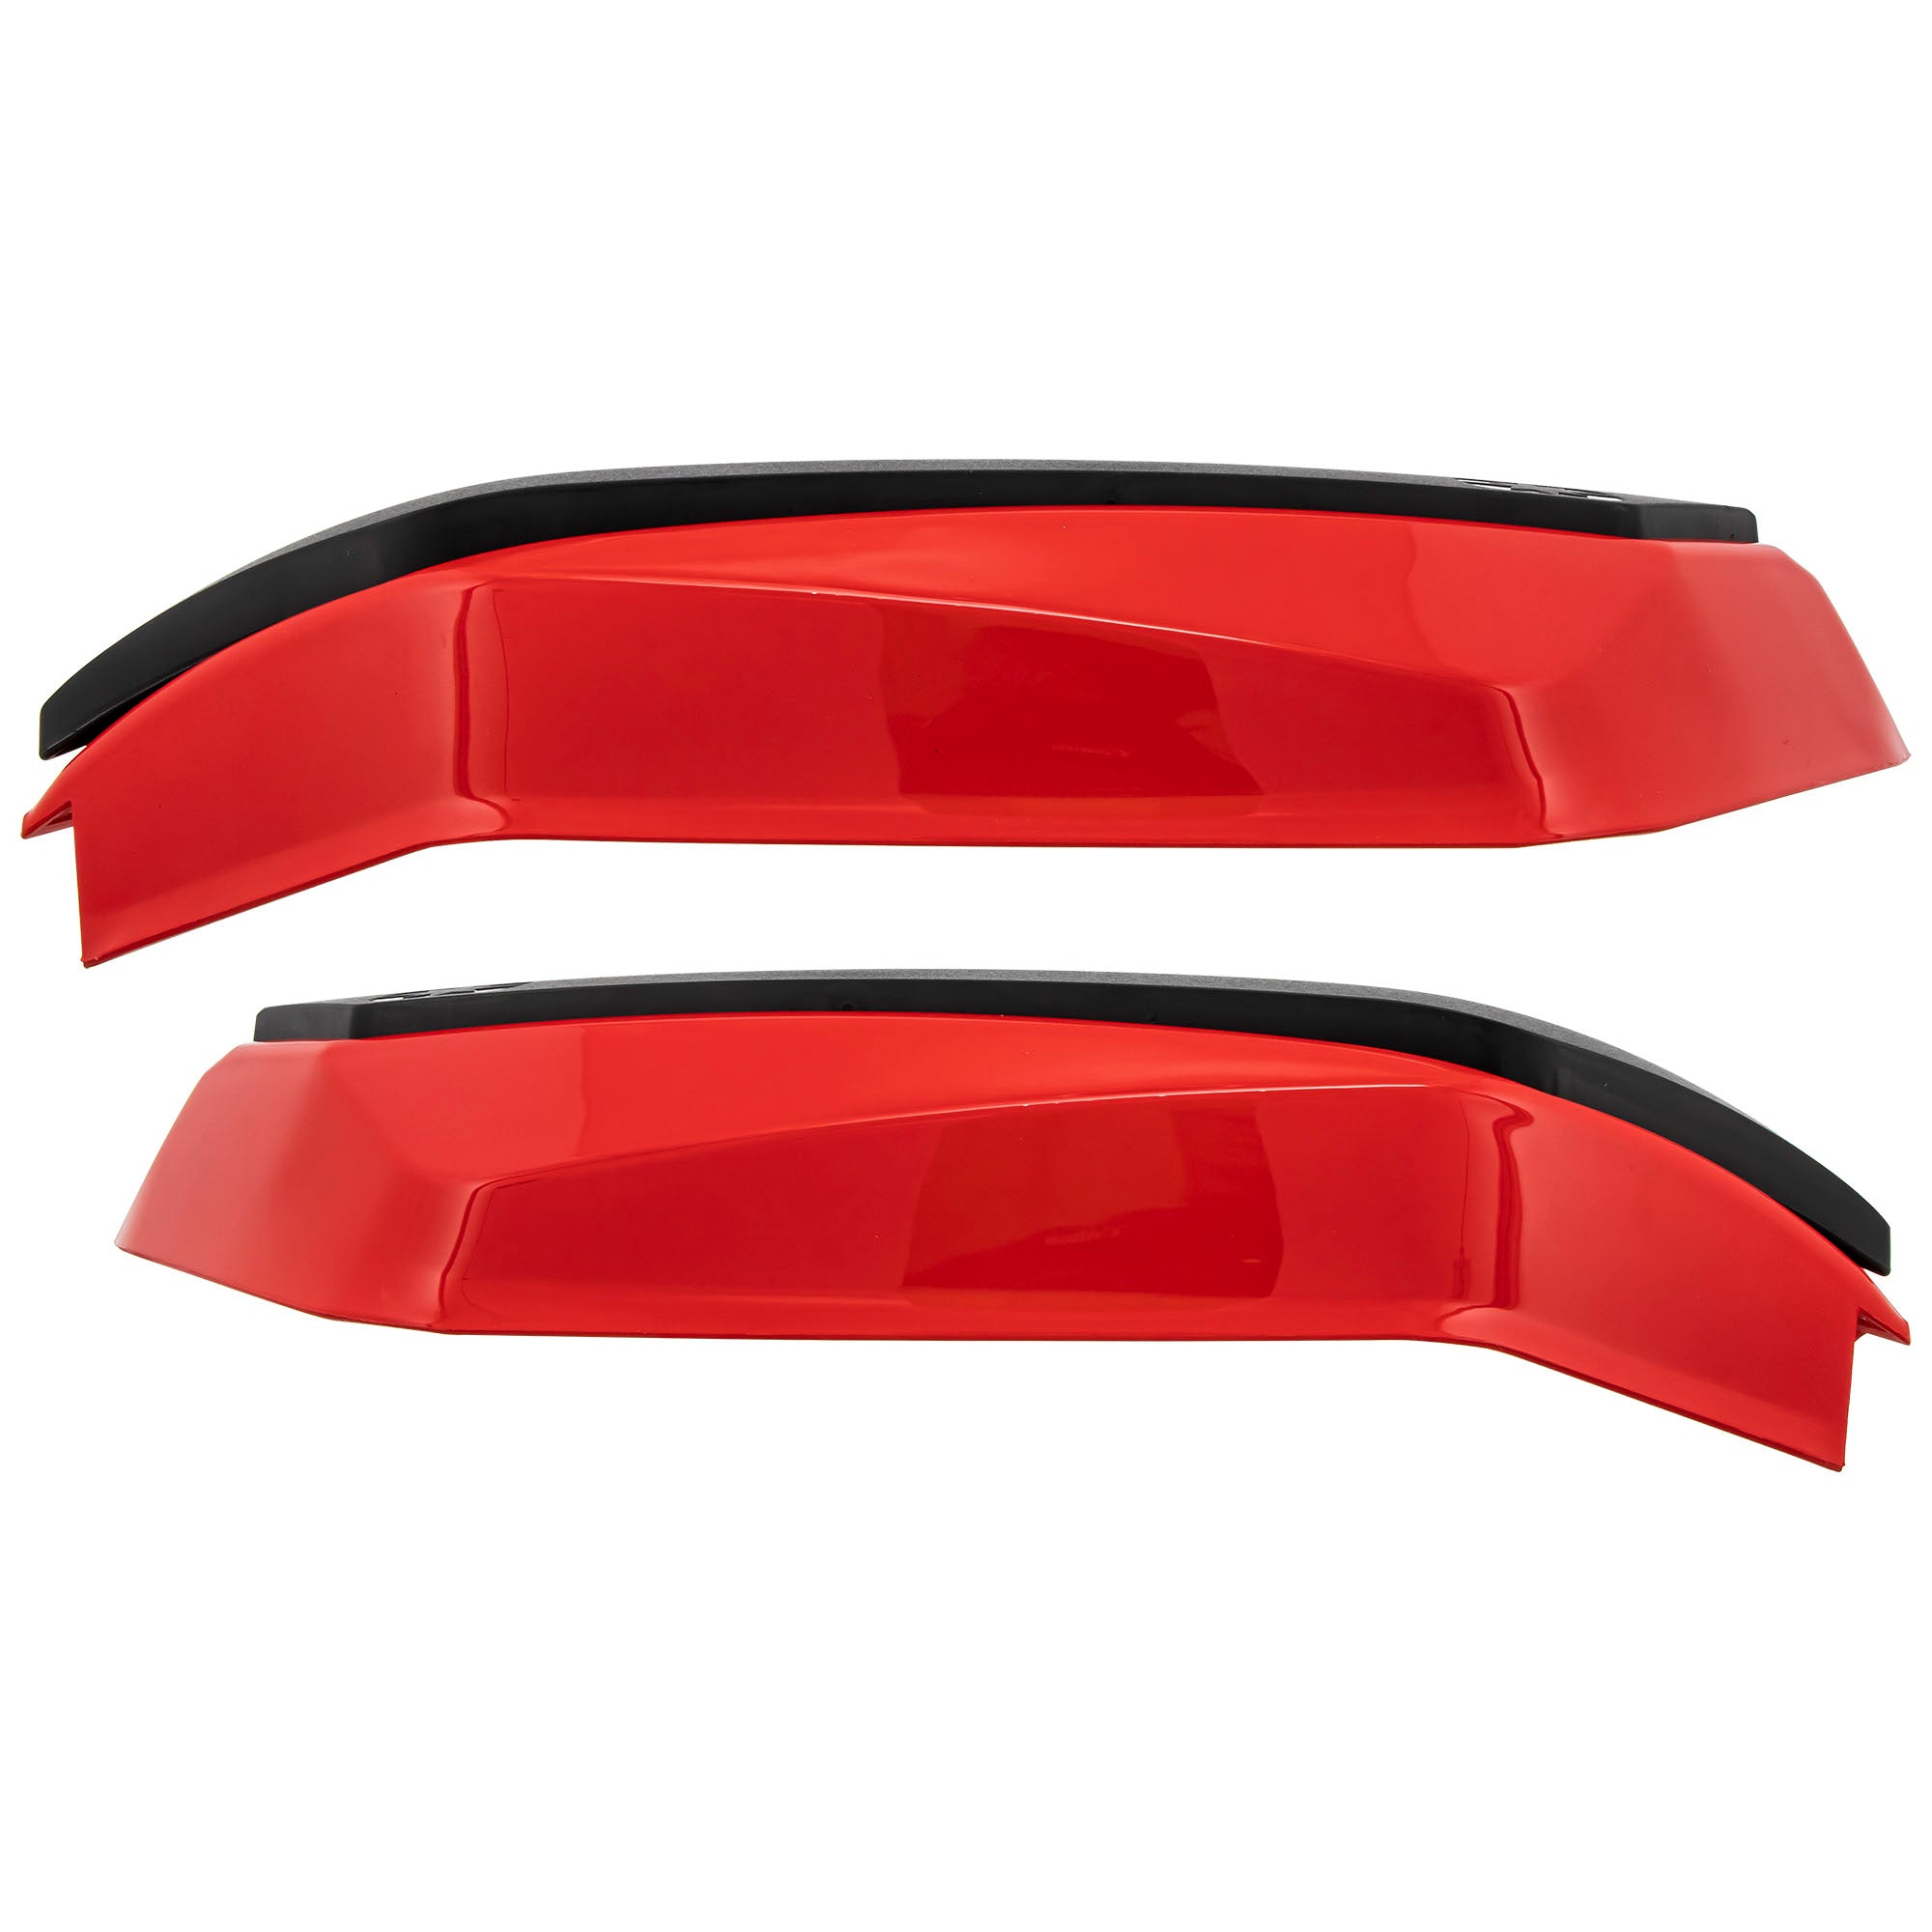 Polaris Indy Red Defend Hand Guards 2884616-293